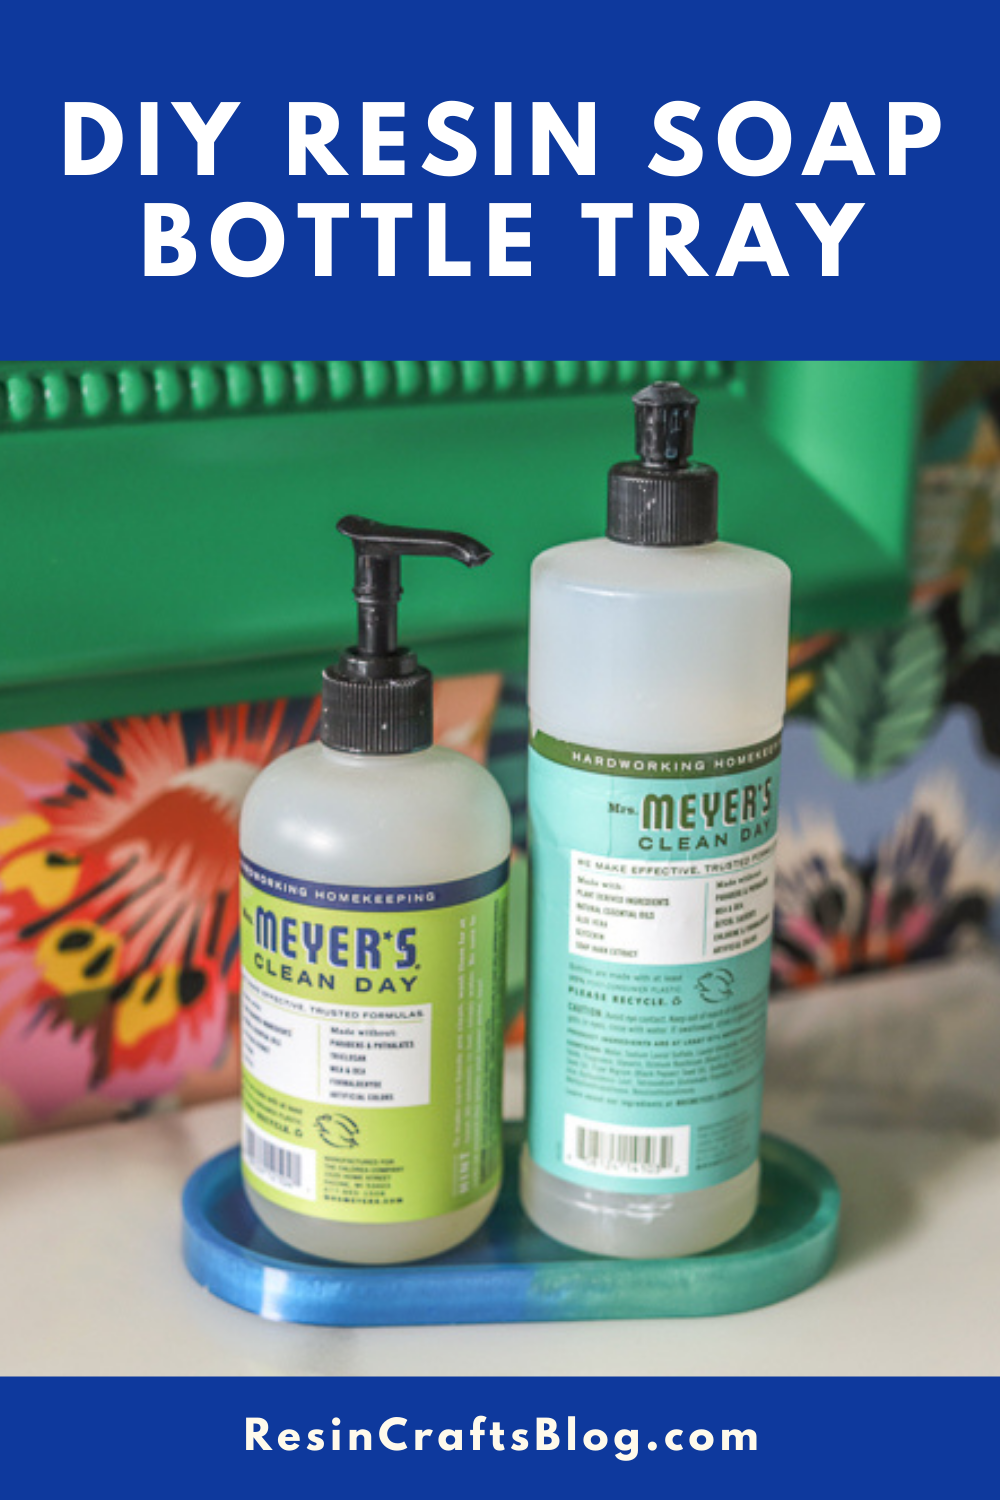 Organize your sink area with a DIY resin soap bottle tray made with EasyCast clear casting epoxy and Polycolor resin powder! #resincraftsblog #resin via @resincraftsblog